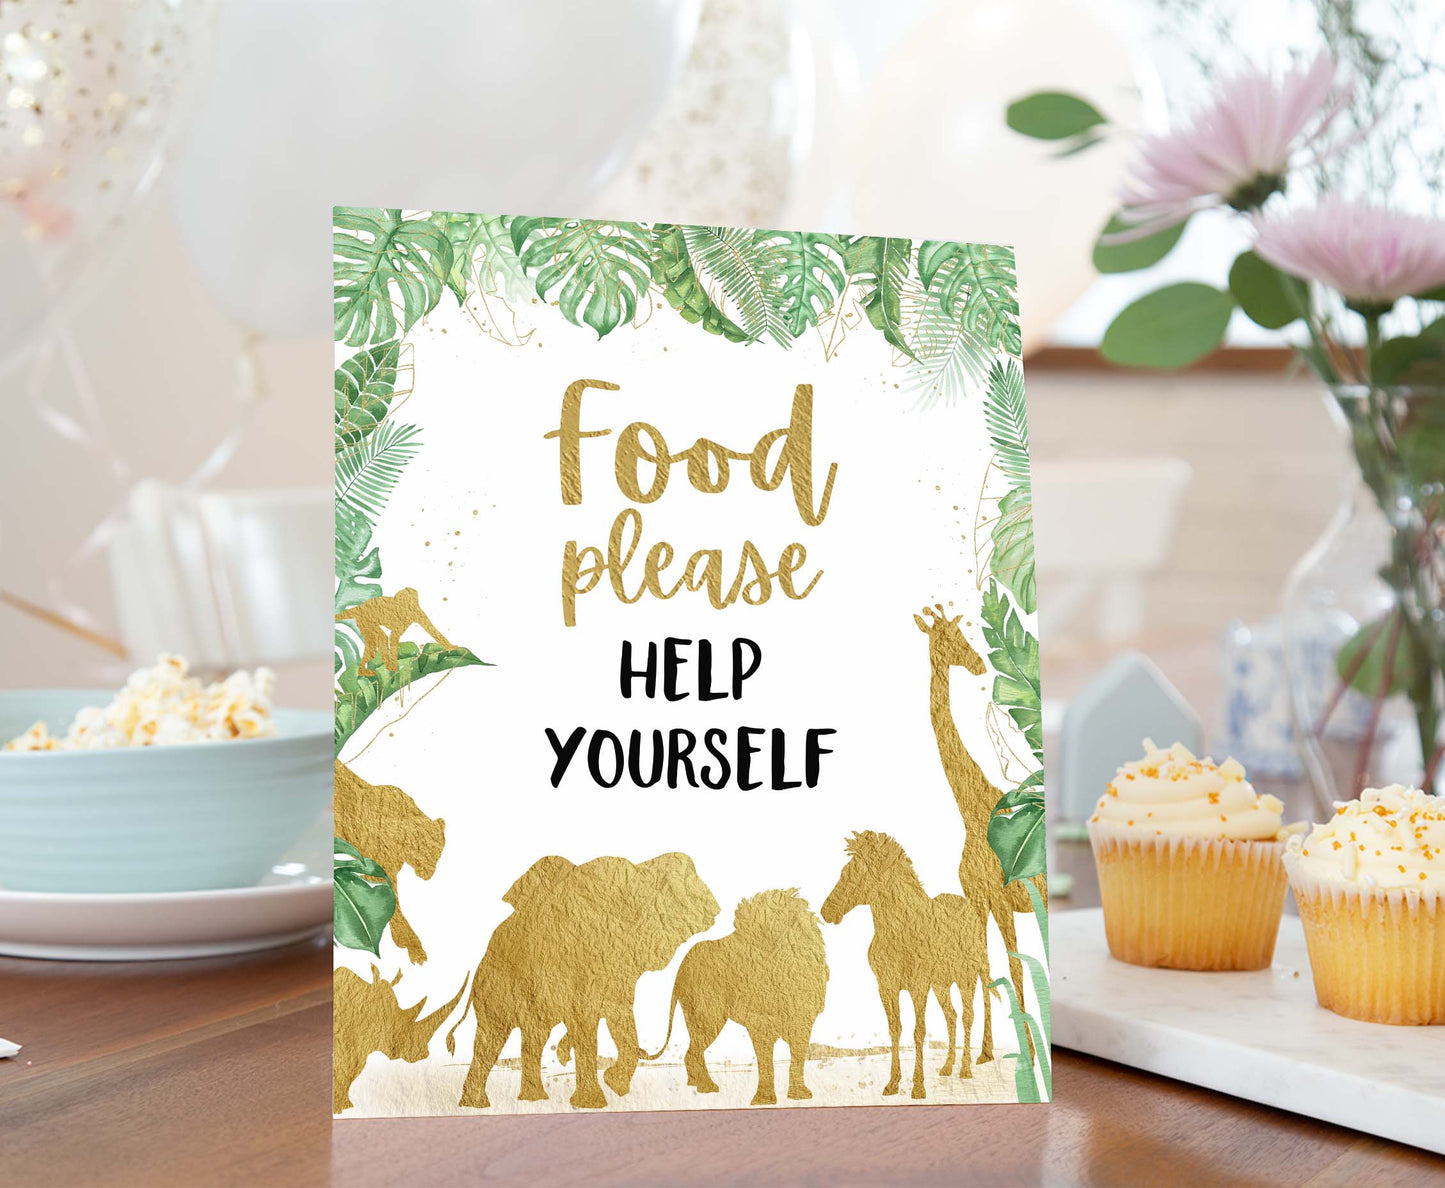 Safari please don't feed the animals Sign | Jungle Themed Party Table Decorations - 35K